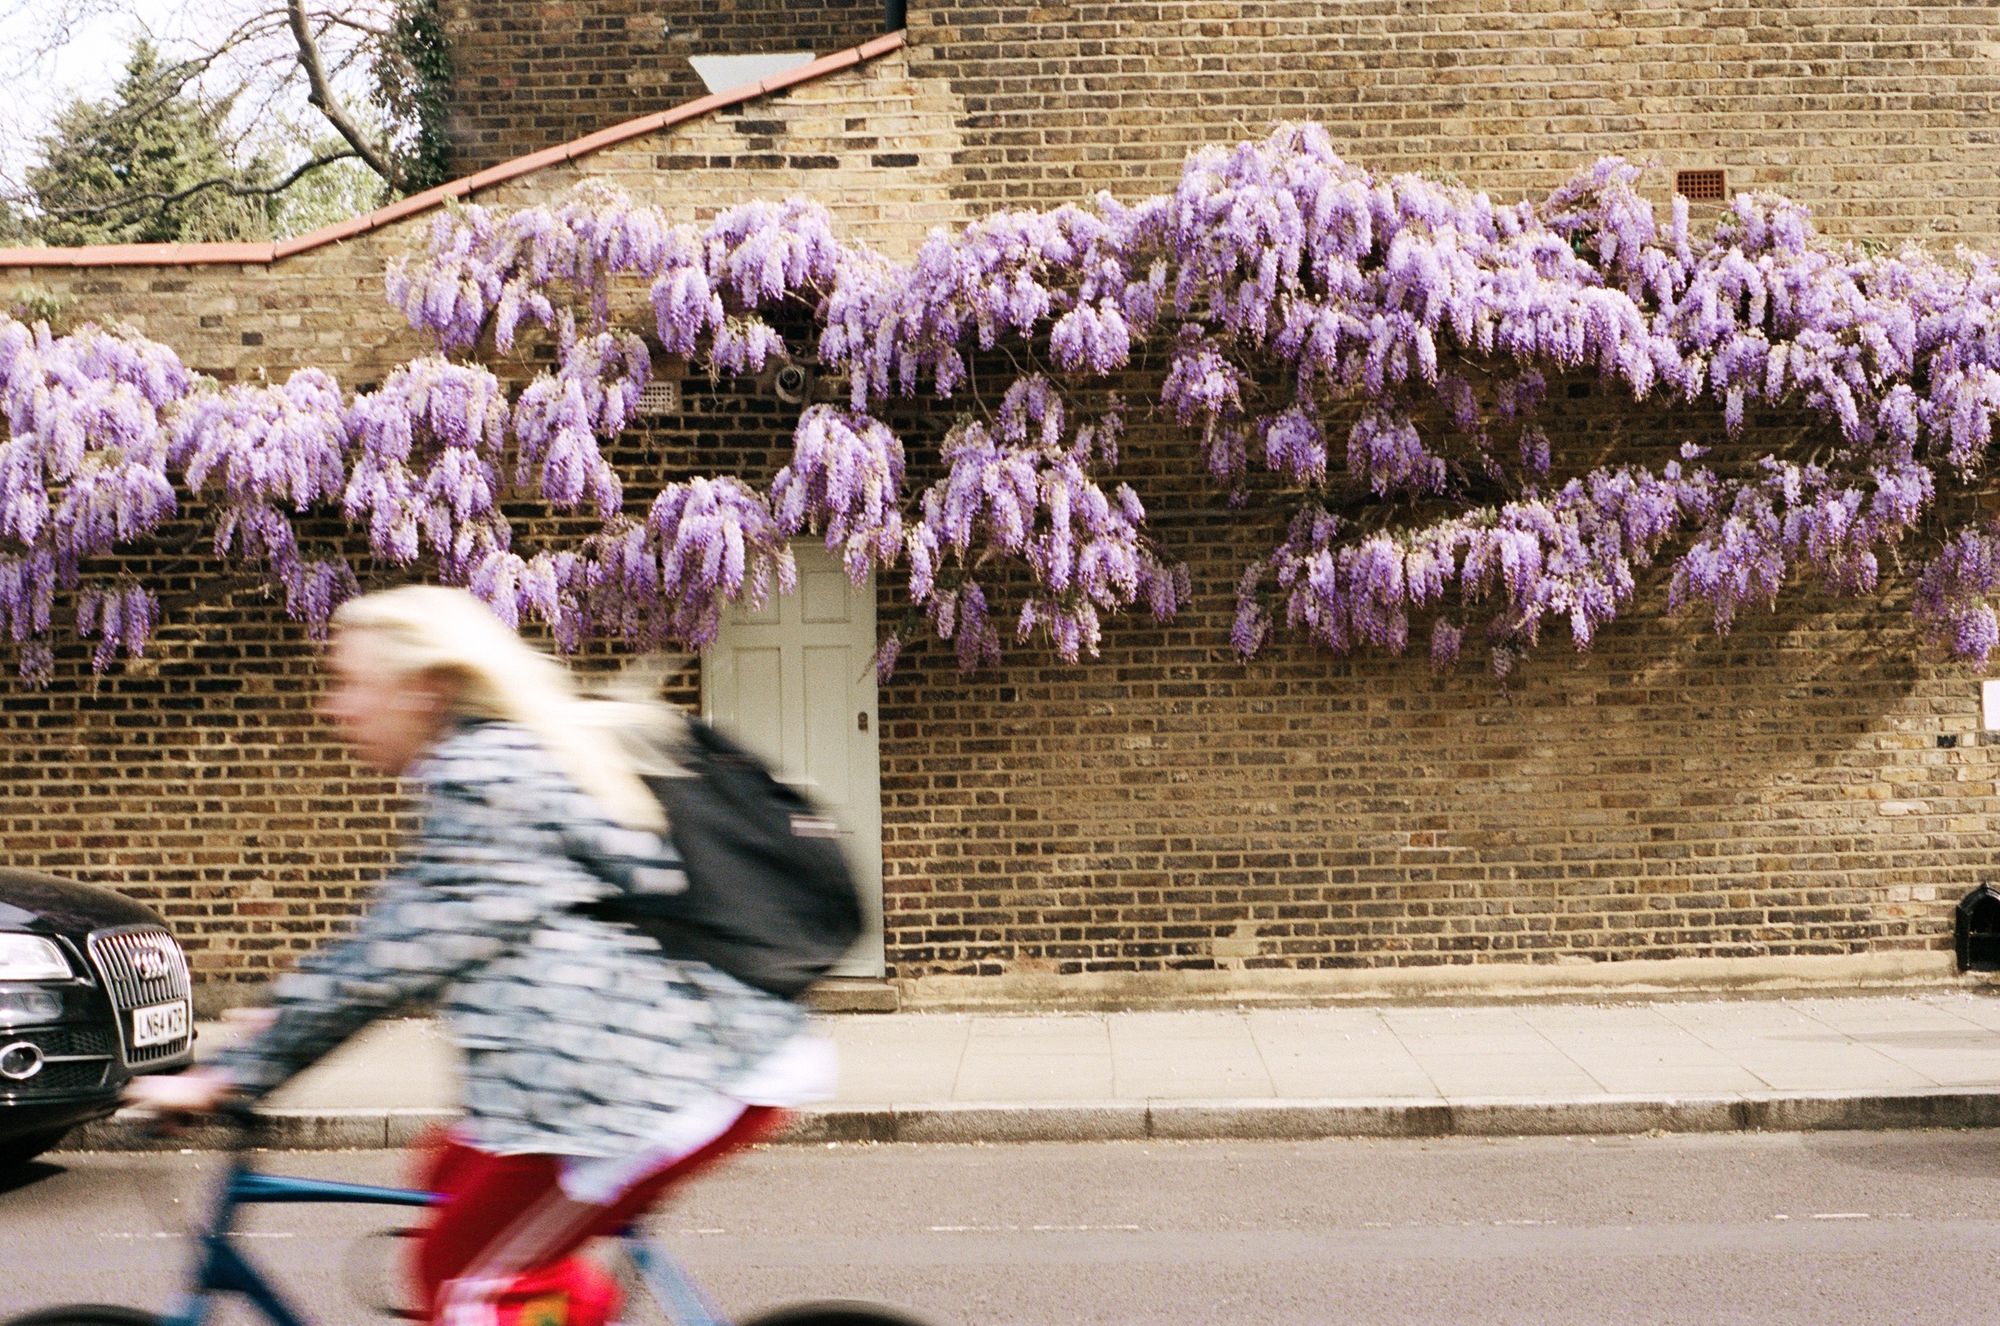 A woman with a patterned navy-and-white coat, red trousers, and blonde hair, rides a blue bike past a house with a spectacular wisteria which seems to have exploded across a vast expanse of the wall, purple flowers raining down over the doorway and the pavement.